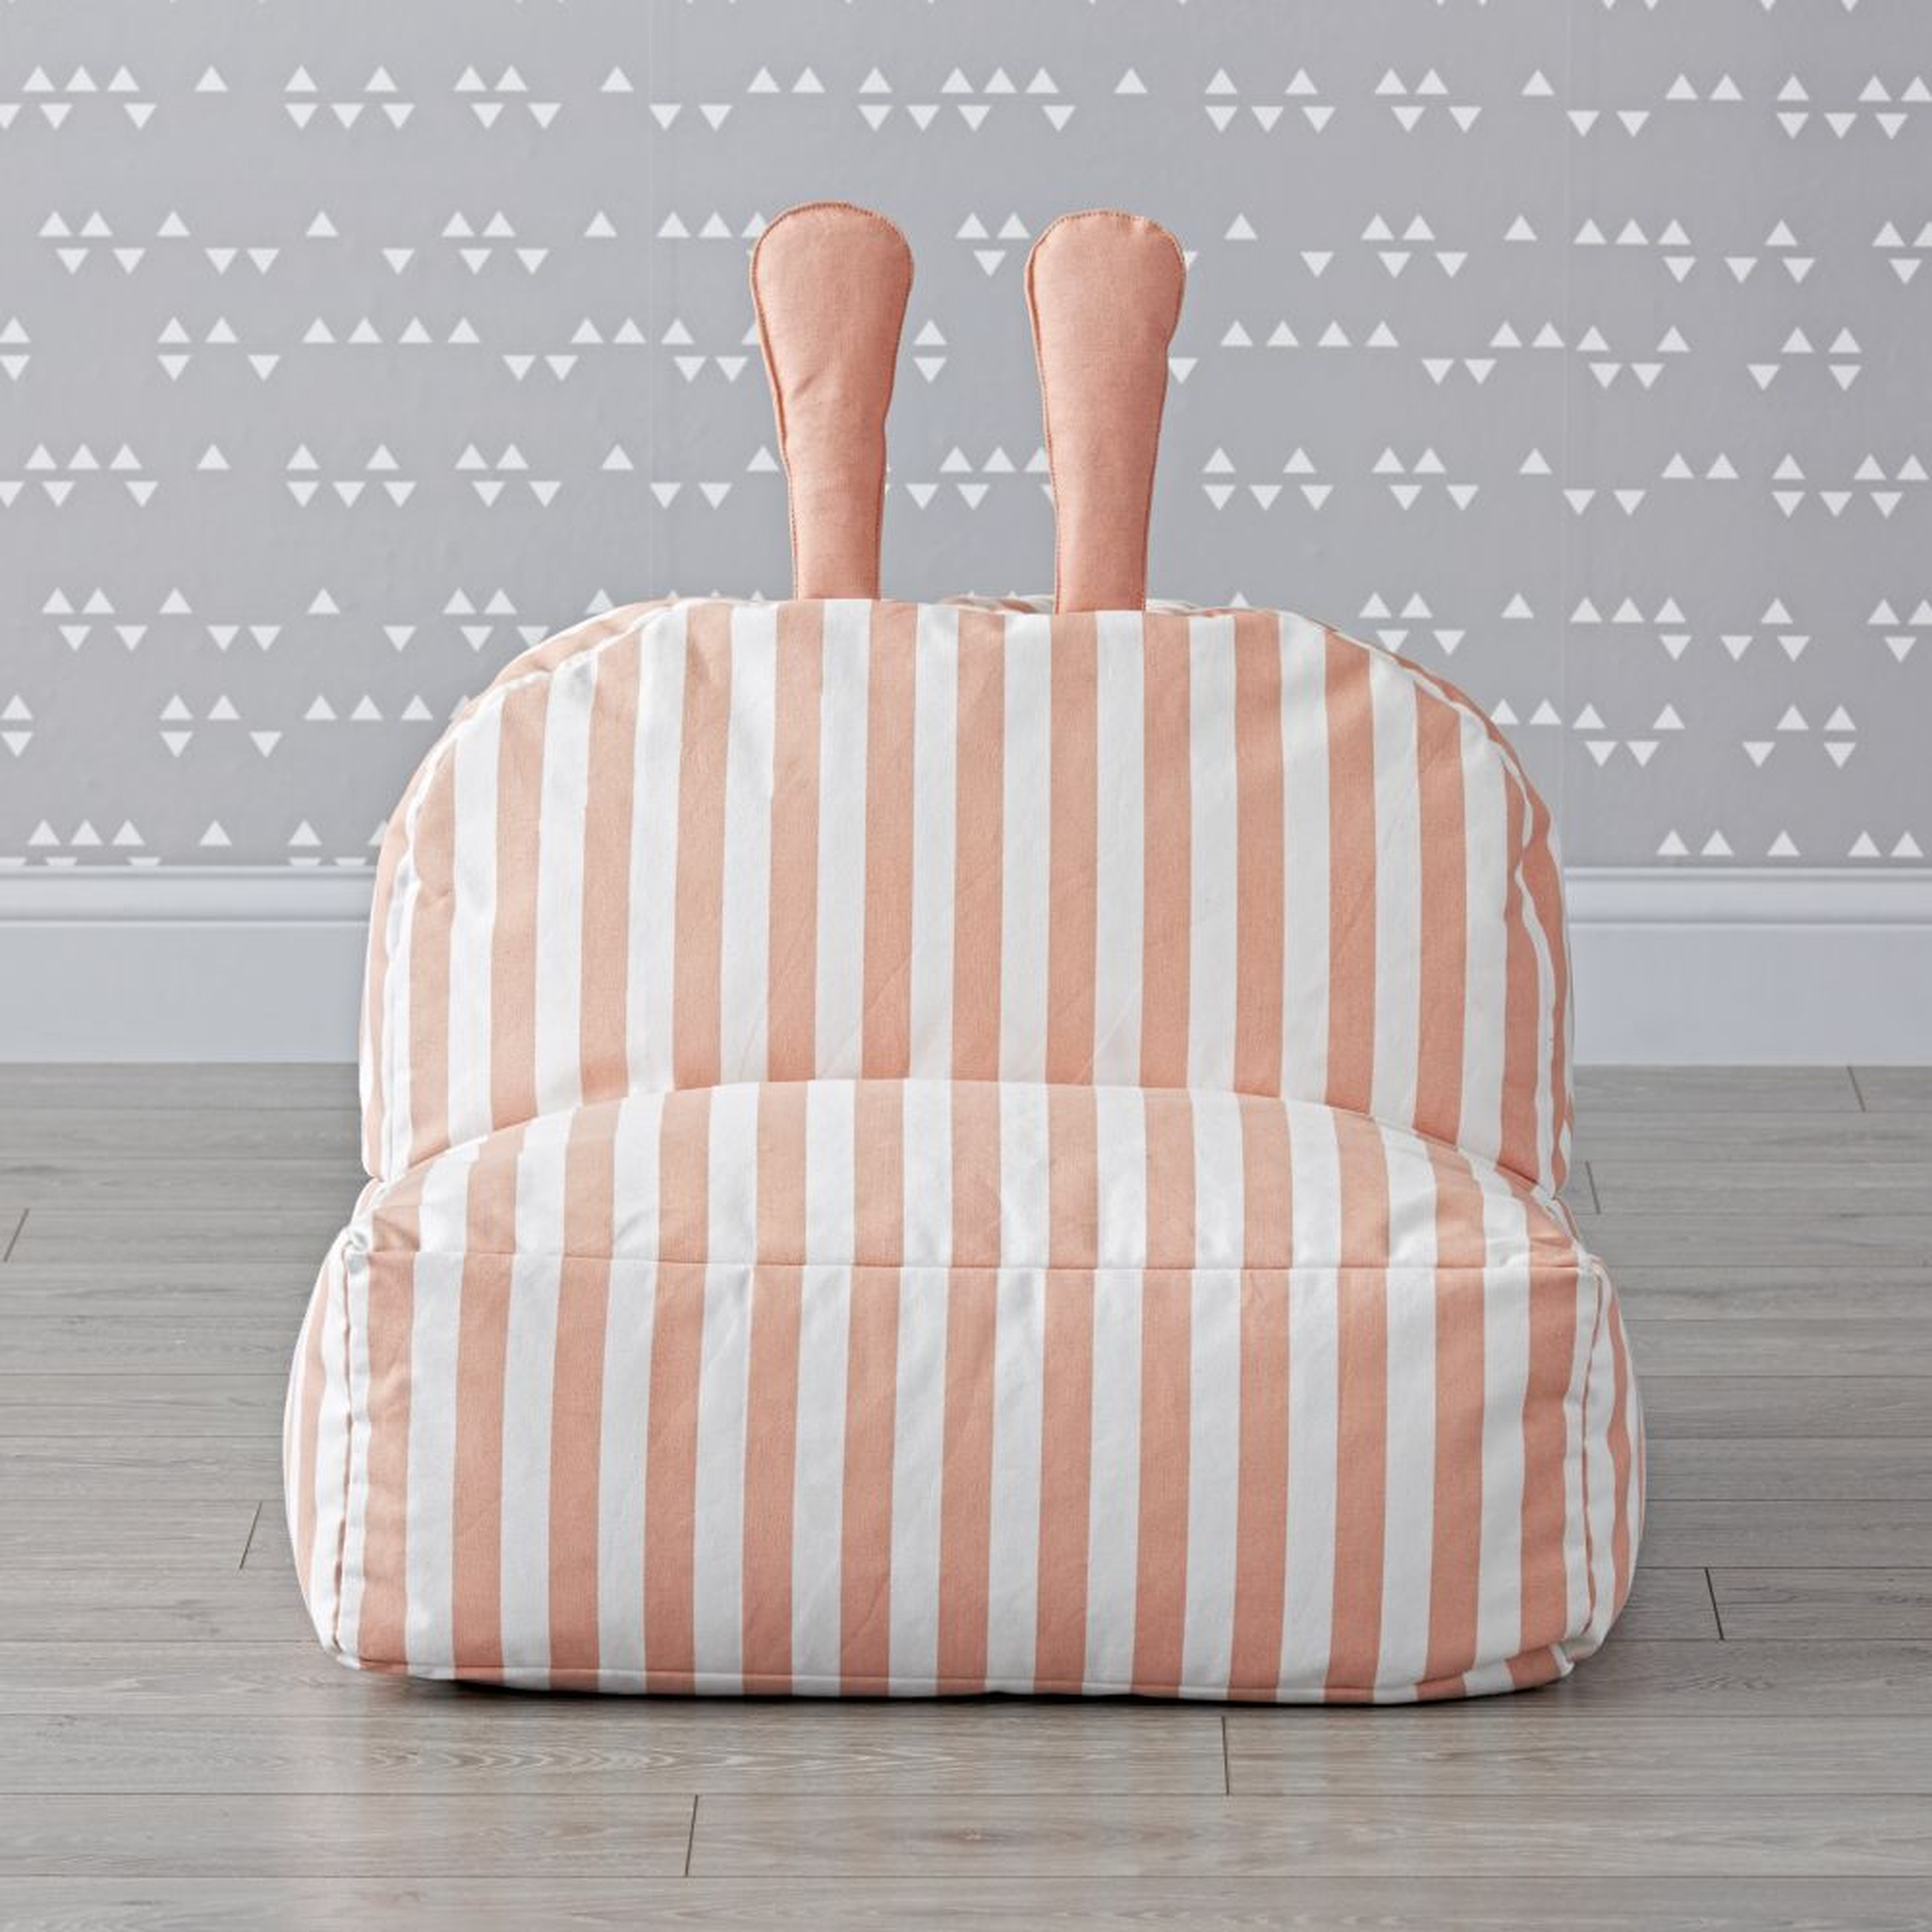 Striped Bunny Bean Bag Chair - Crate and Barrel